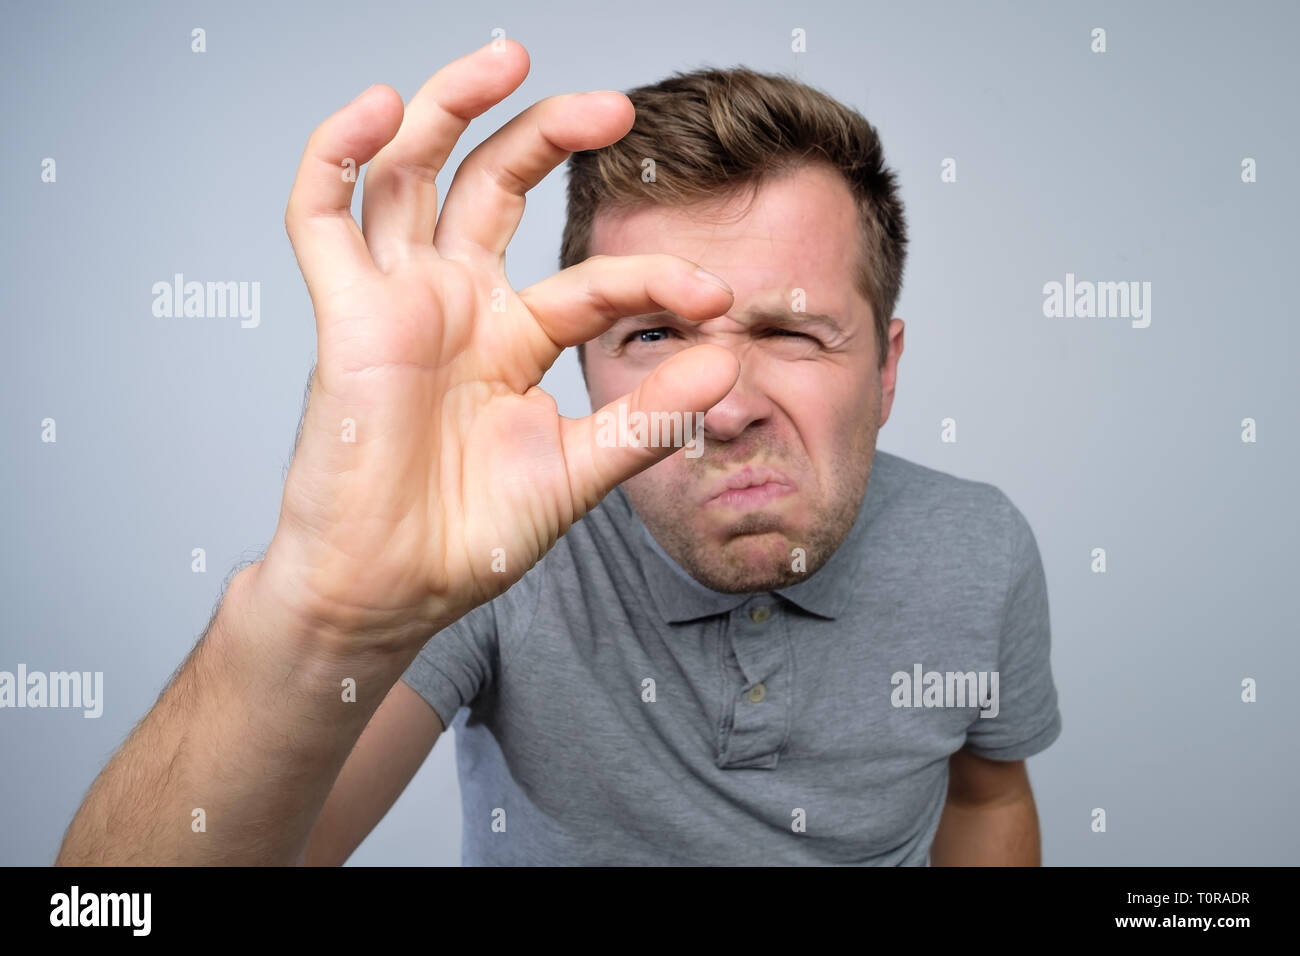 https://c8.alamy.com/comp/T0RADR/young-caucasian-man-gesturing-with-hand-showing-small-size-sign-with-fingers-T0RADR.jpg